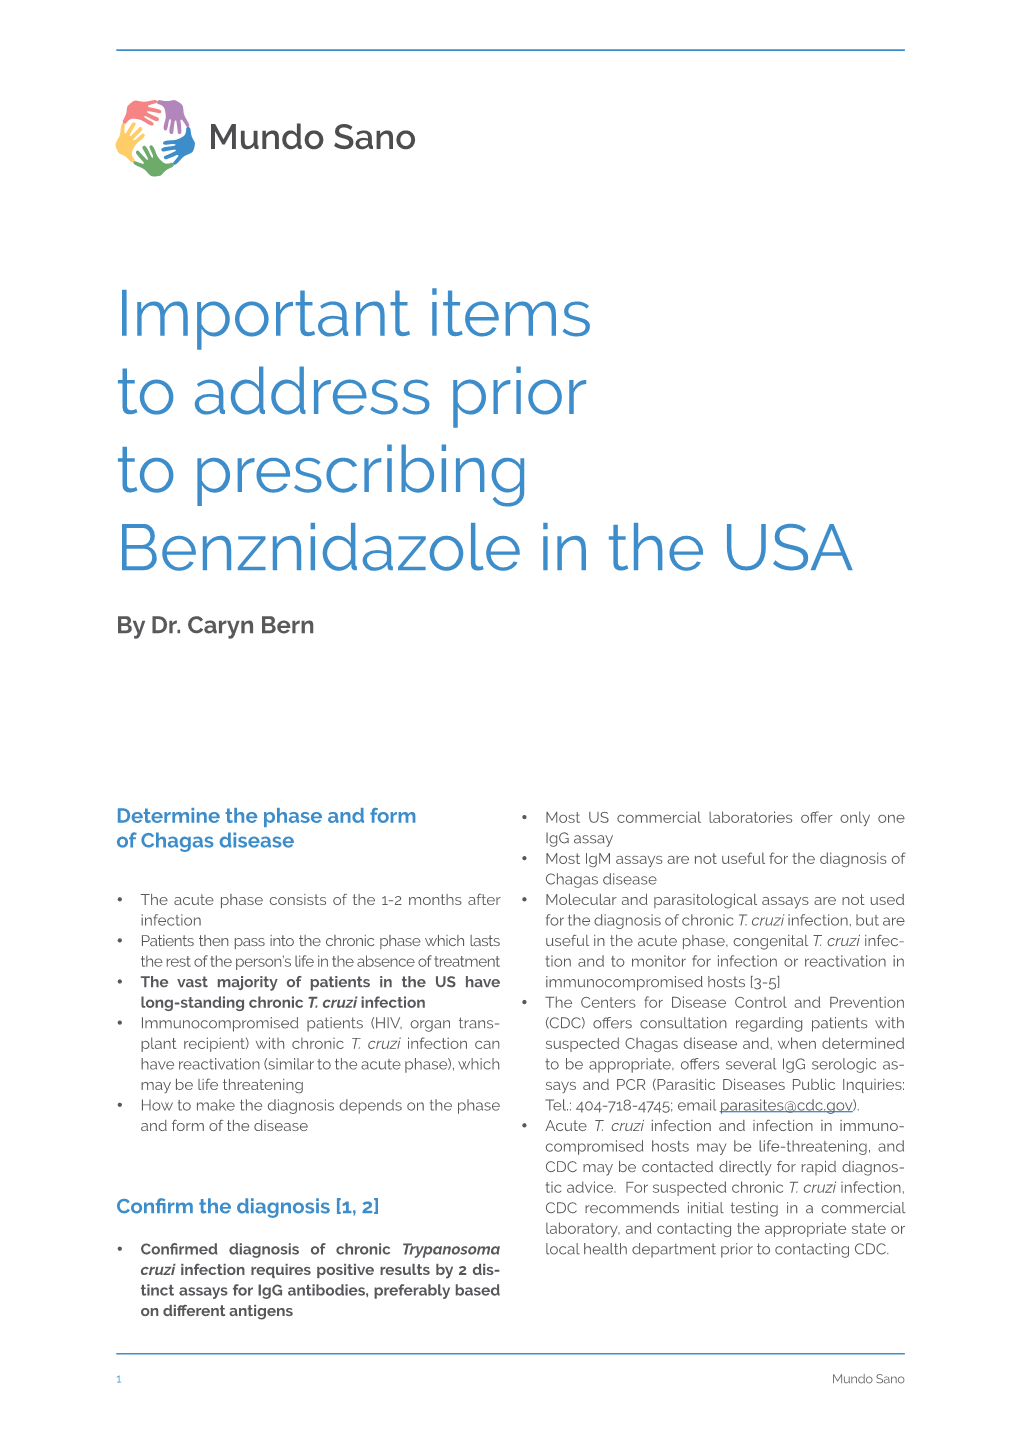 Important Items to Address Prior to Prescribing Benznidazole in the USA